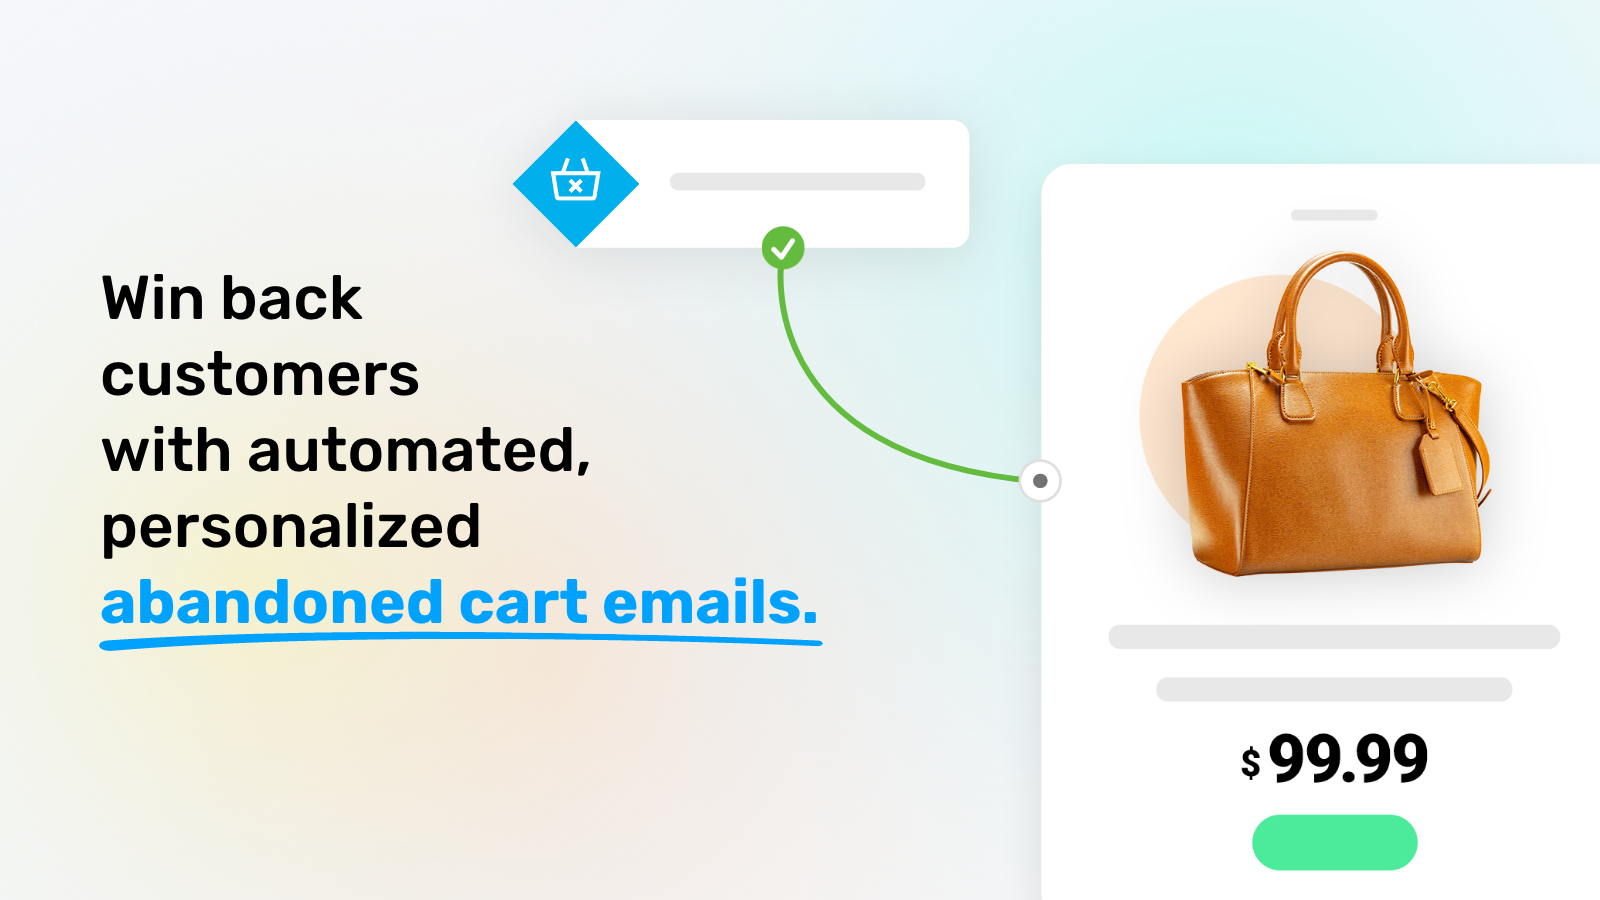 Win back customers with abandoned cart emails